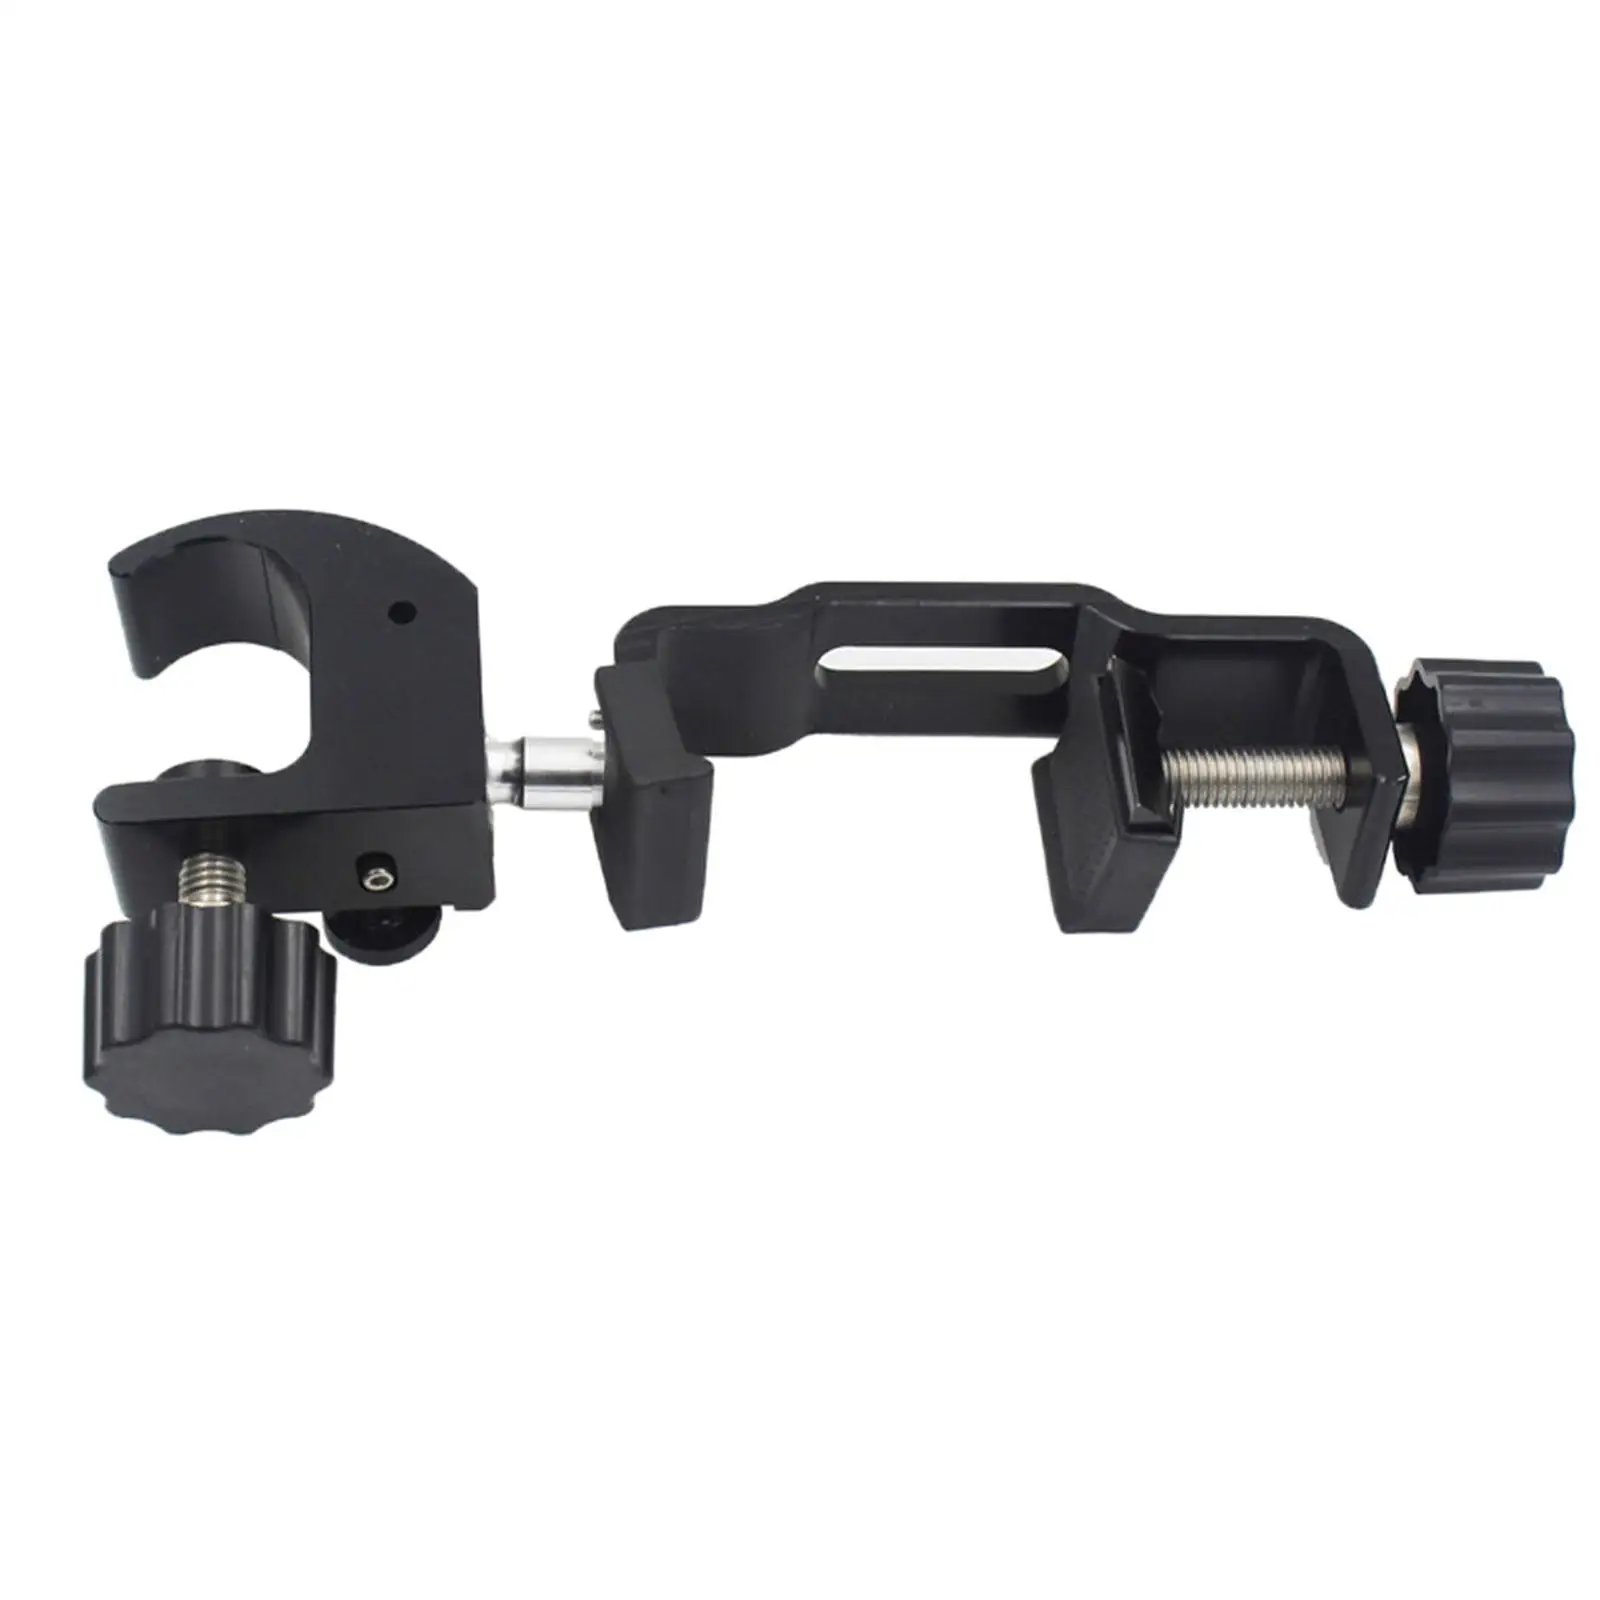 GPS Pole Clamp with Open Data Collector Cradle Quick Release Corrosion-Resistant Rtk Pole Clamp